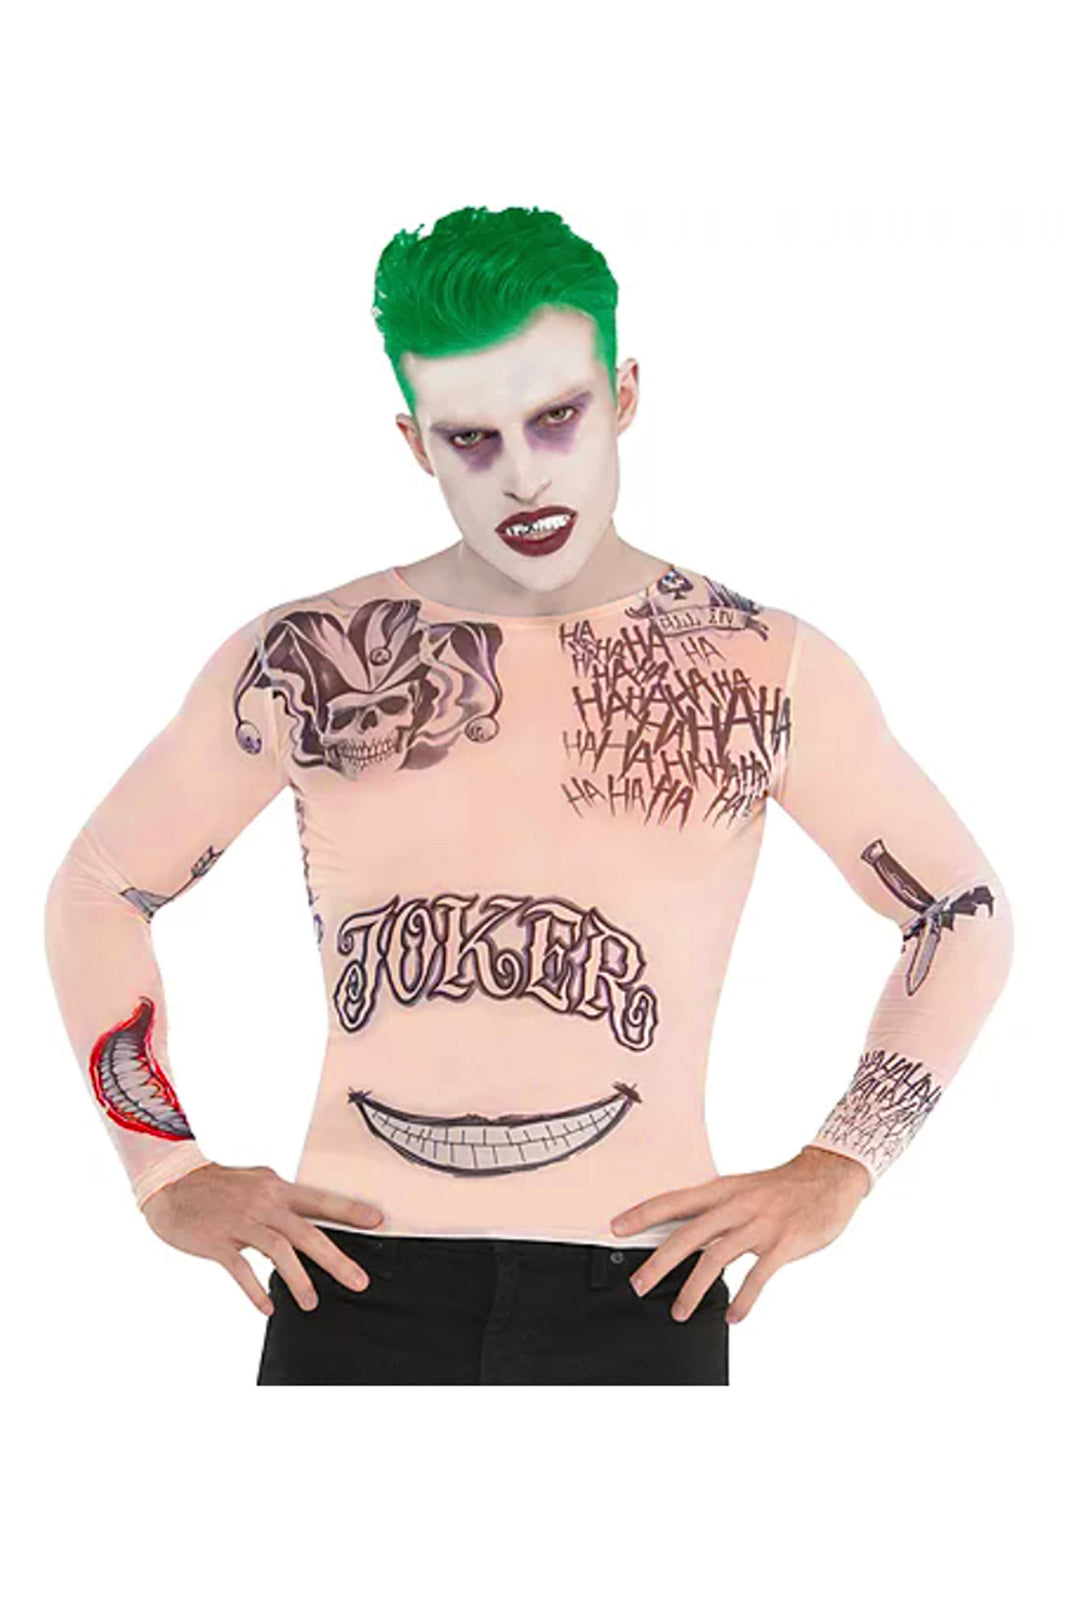 Suicide Squads David Ayer admits that Jokers tattoos were illconceived